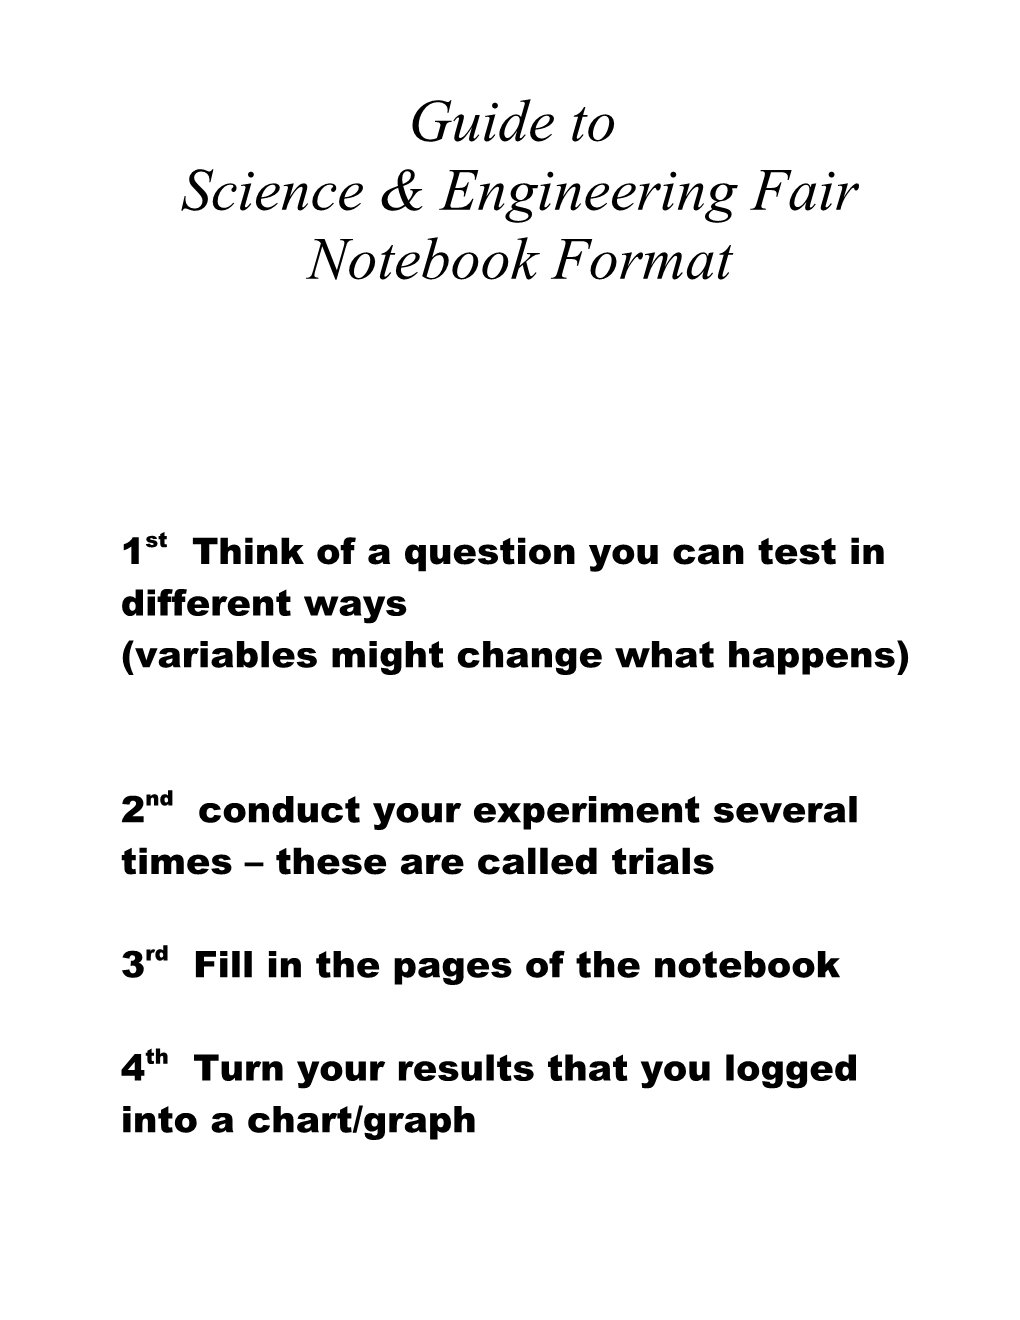 1St Think of a Question You Can Test in Different Ways